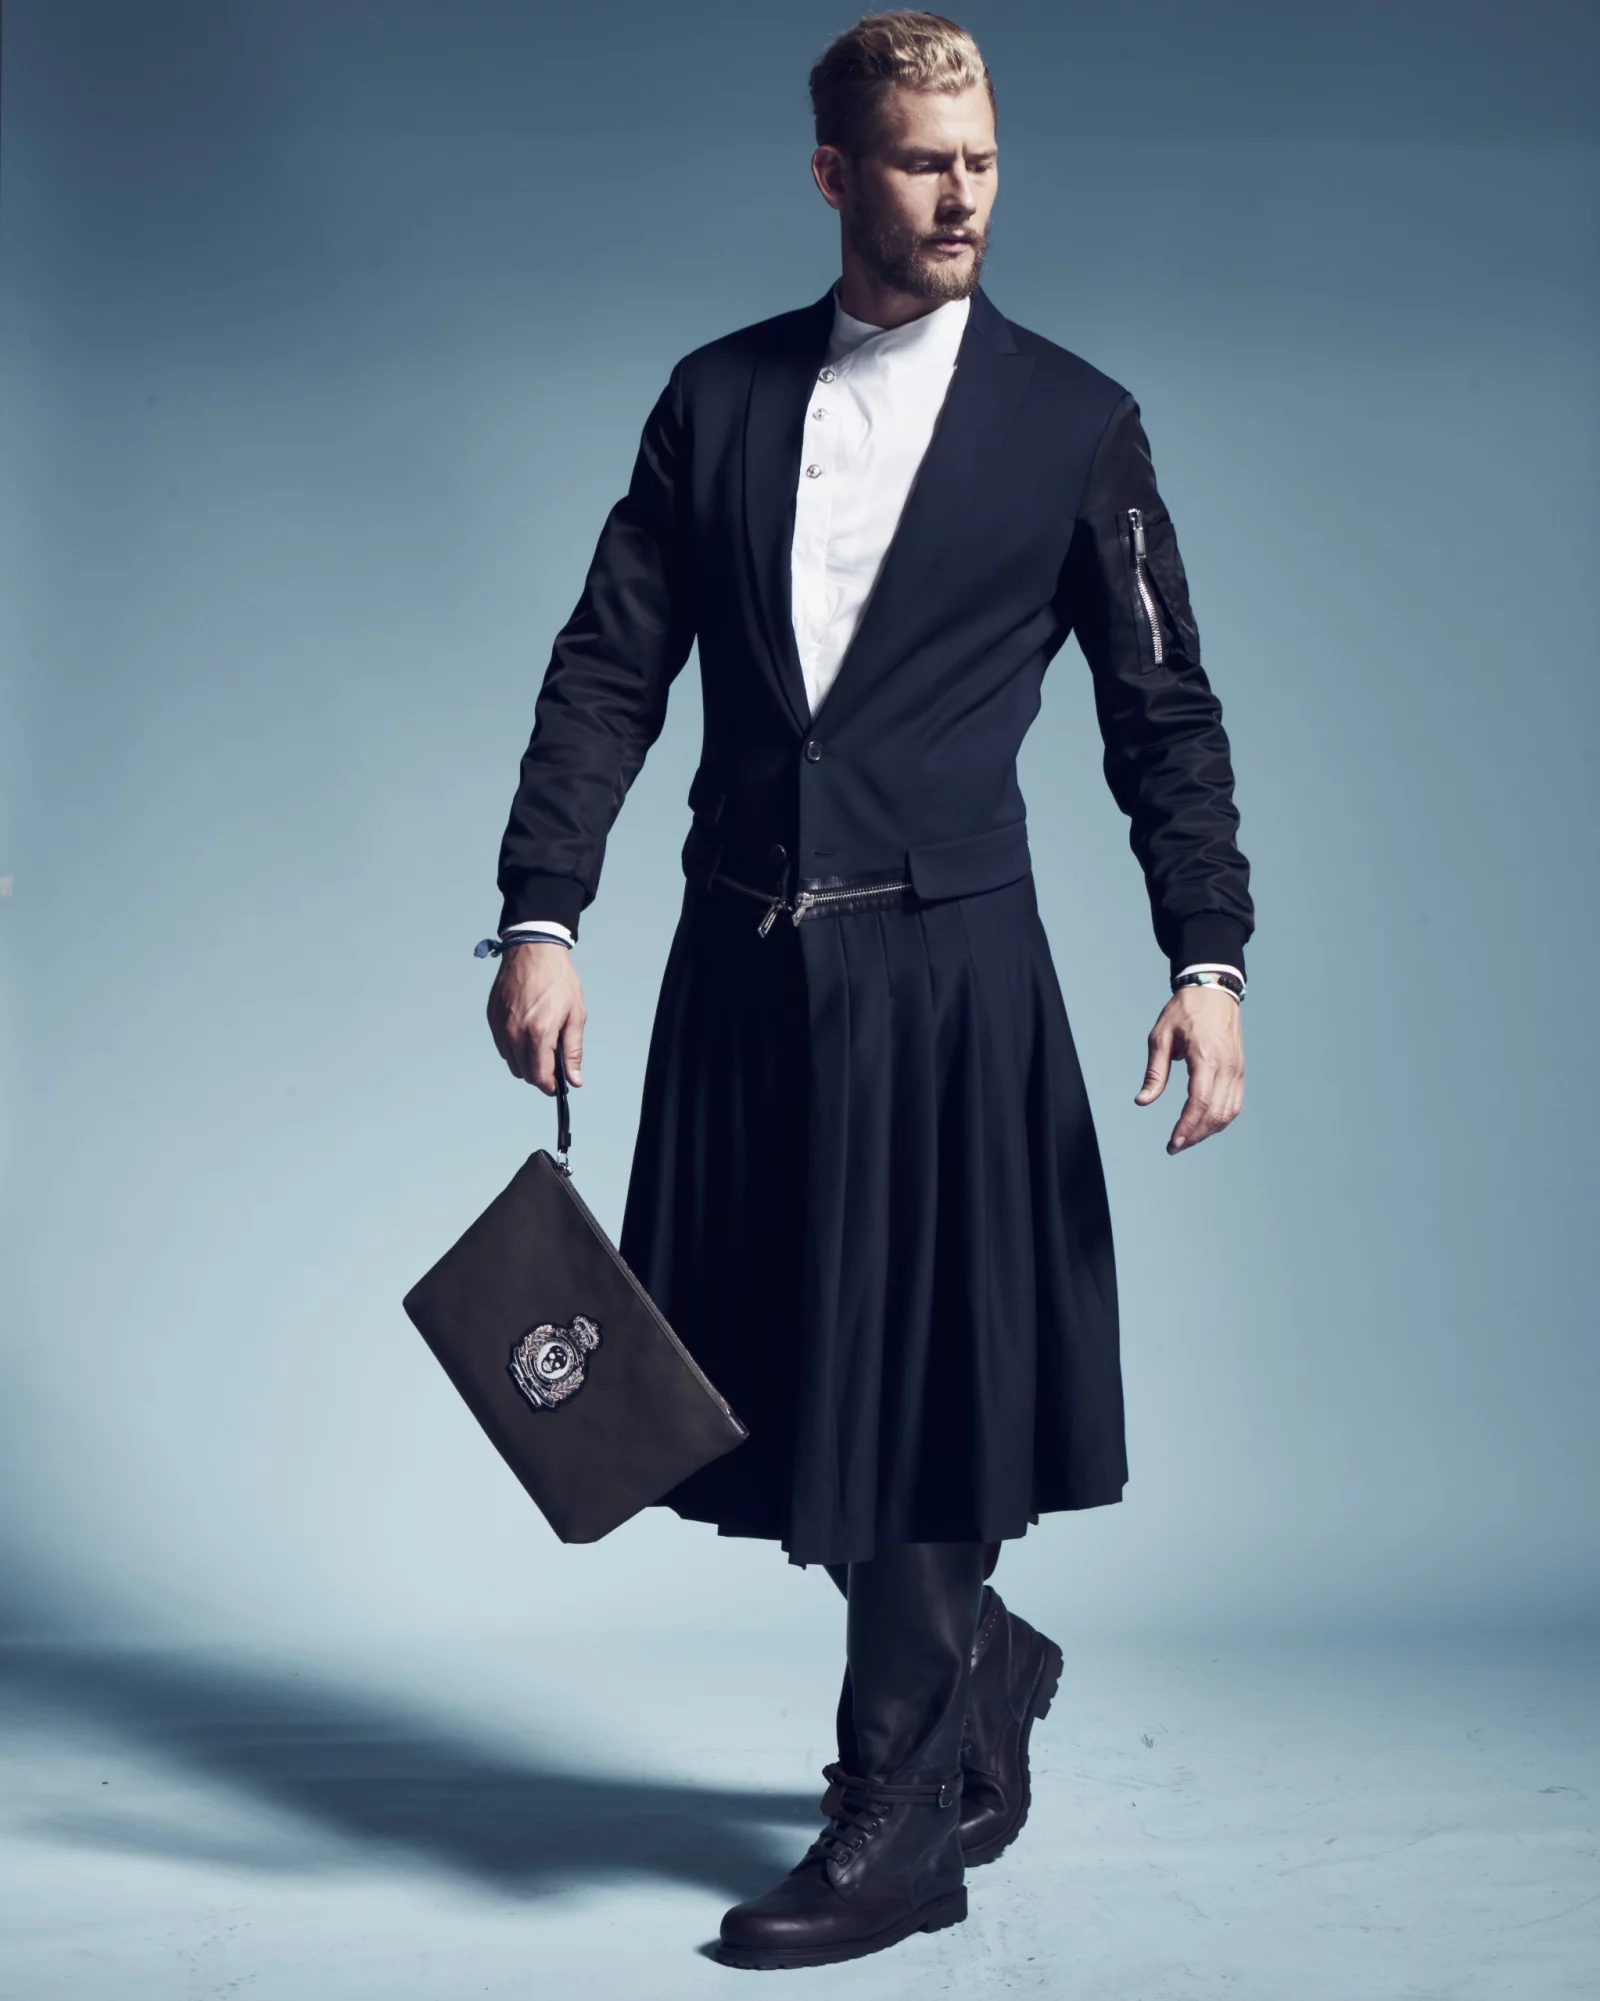 InStyle Men 6 by Andreas ORTNER